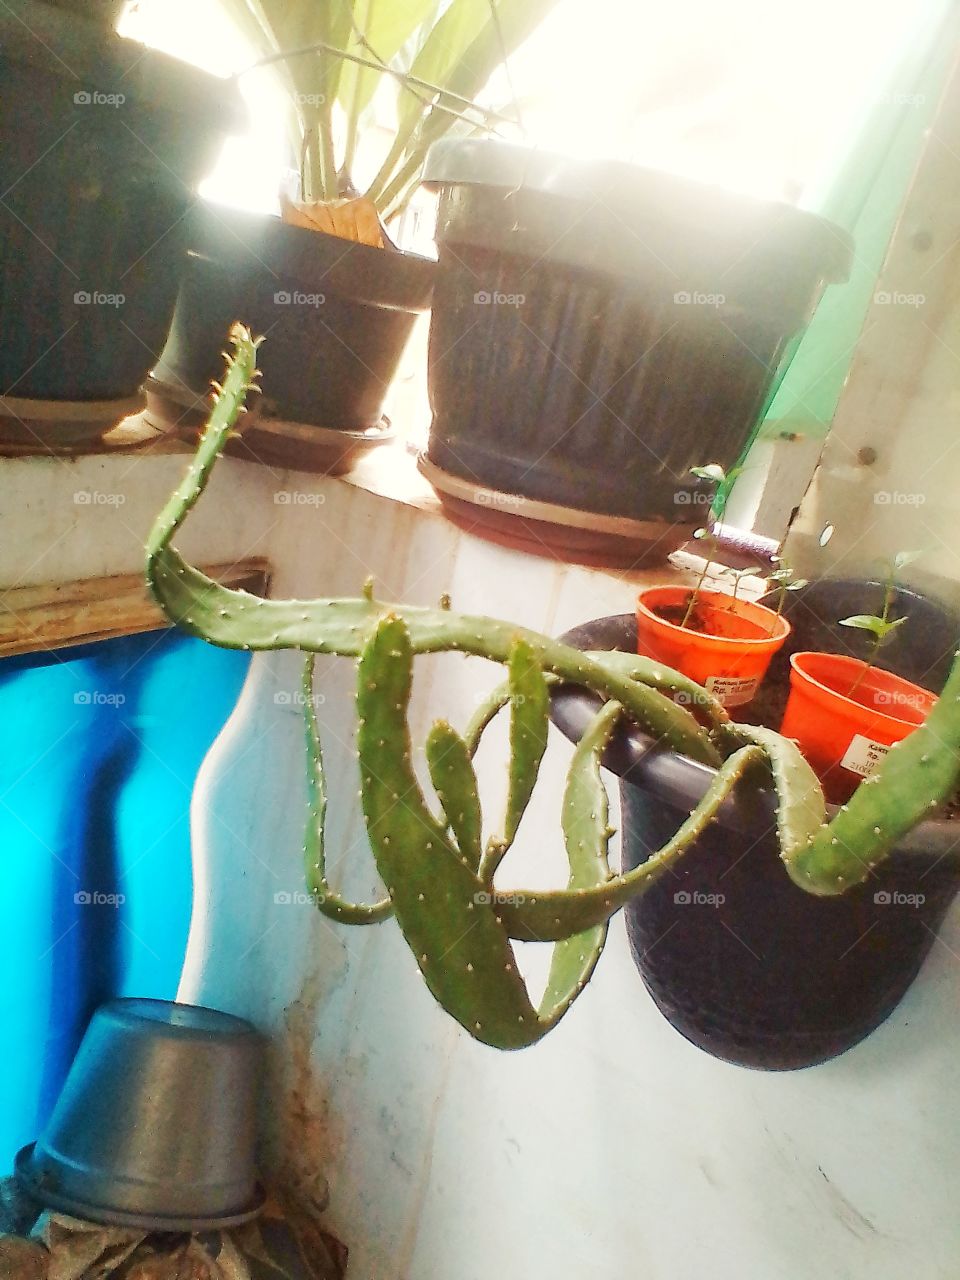 This mini cactus tree grows protruding like a snake